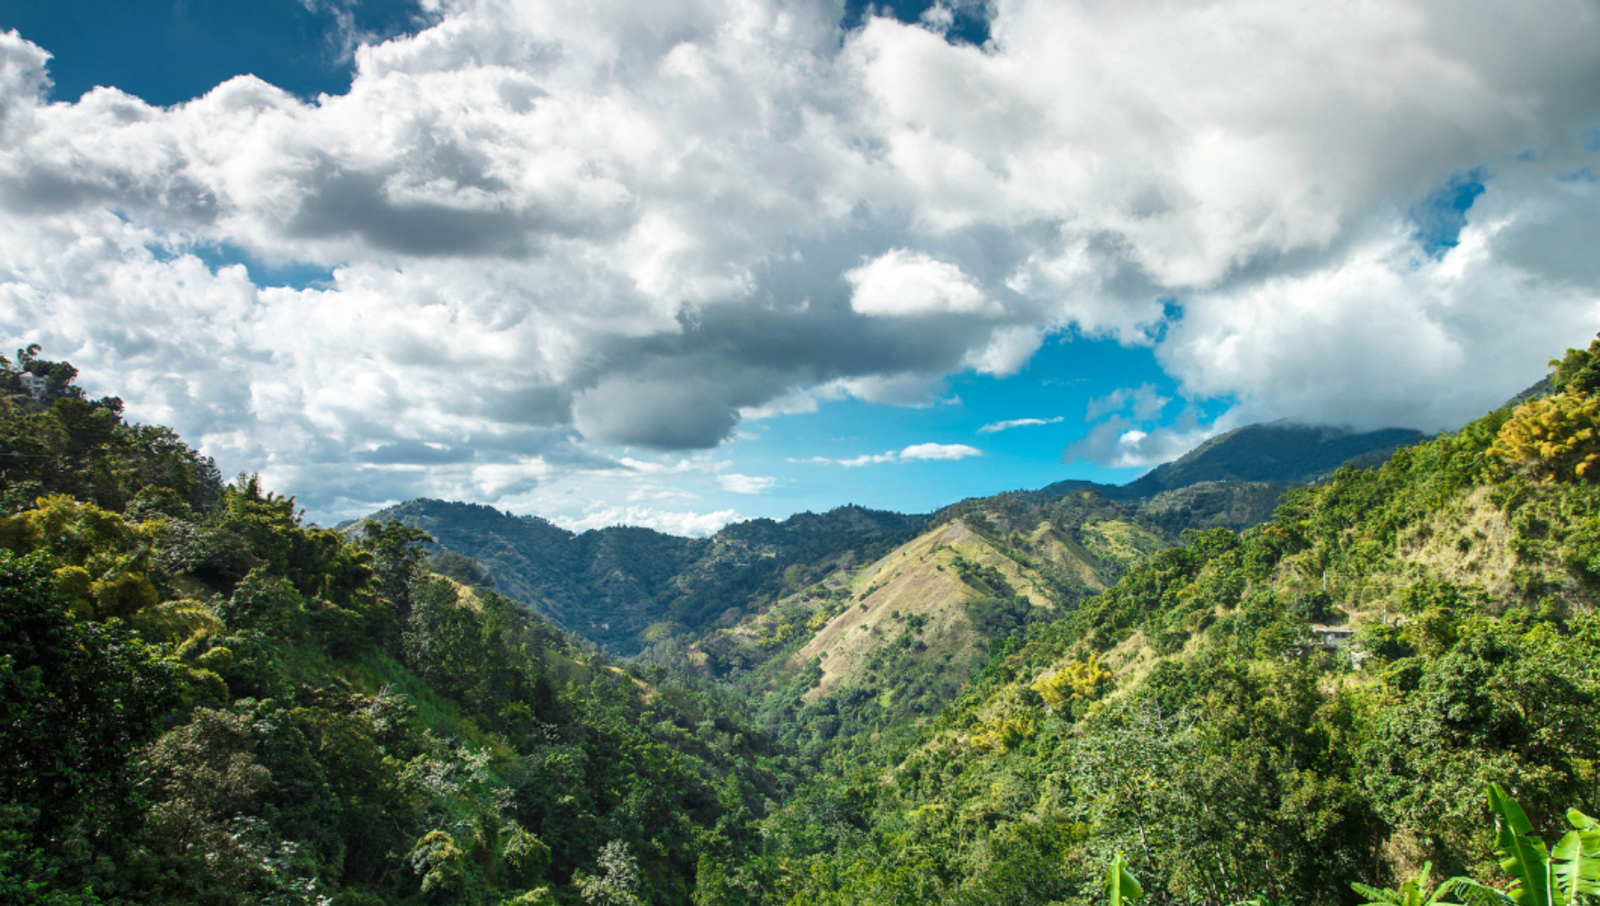 Mountain landscape in Jamaica where coffee tours are popular